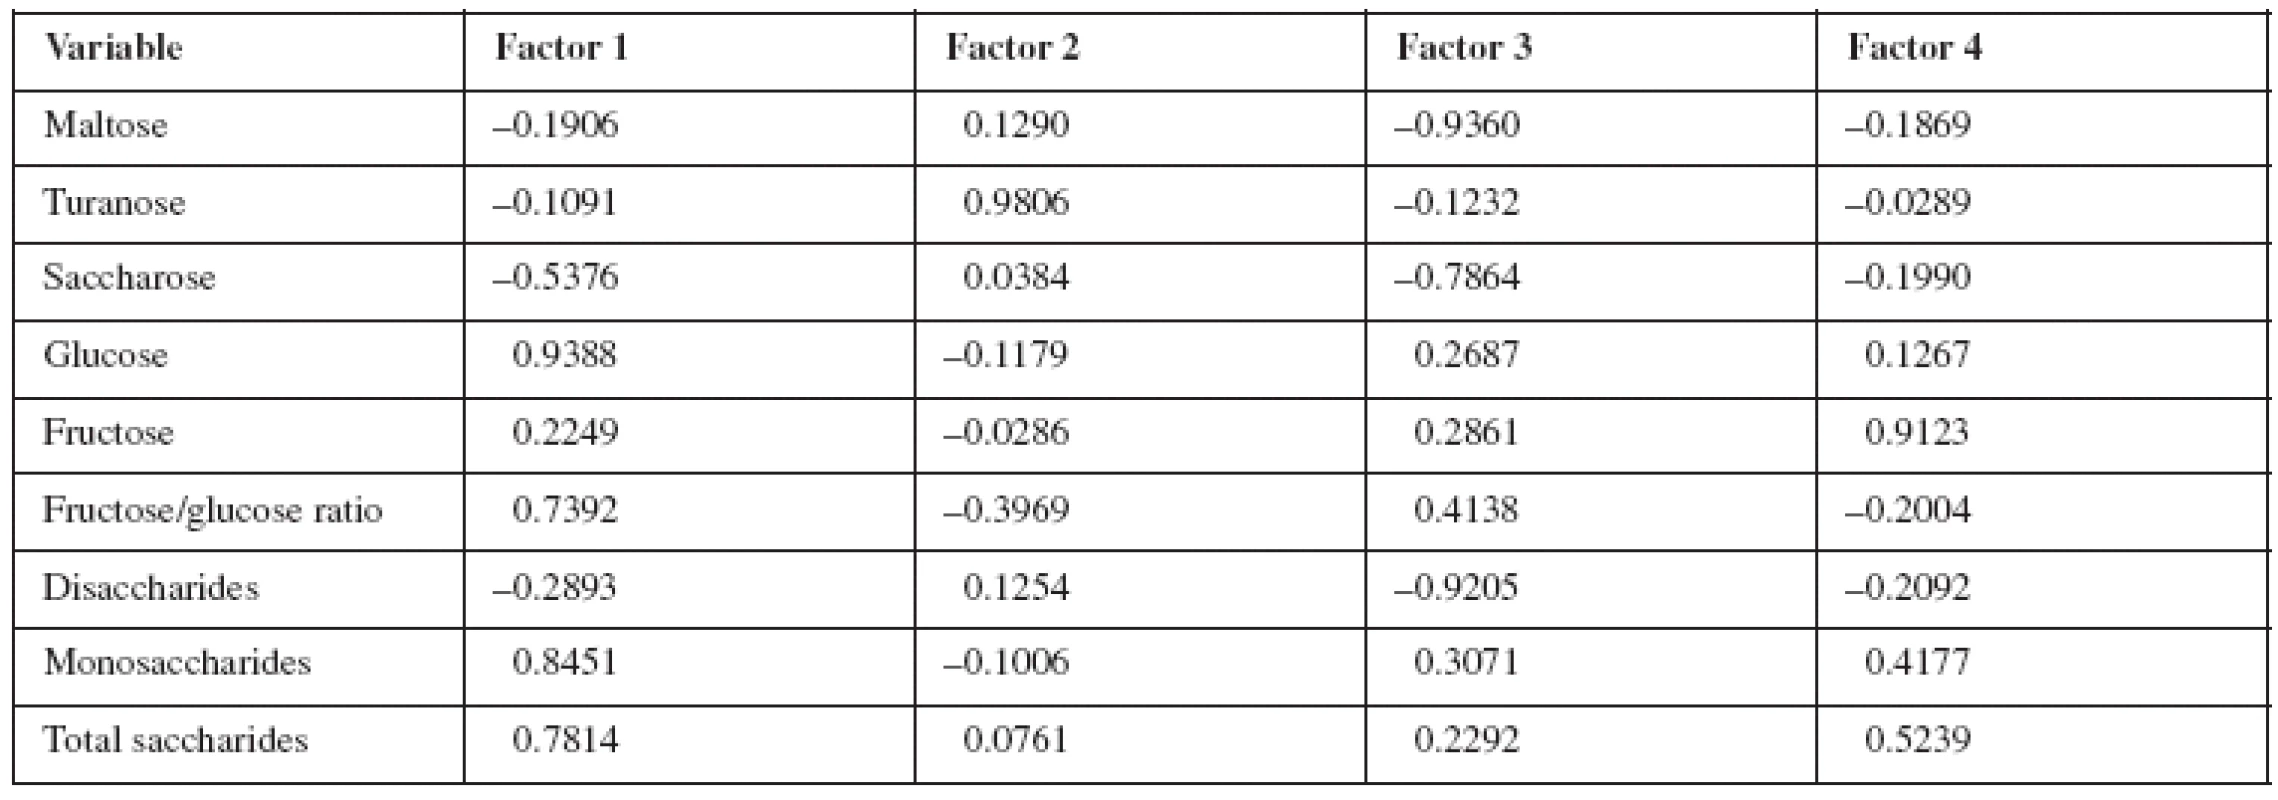 Saturation of variables for four principal components as determined by principal component analysis content: Slovak honey, Croatia honey, France honey